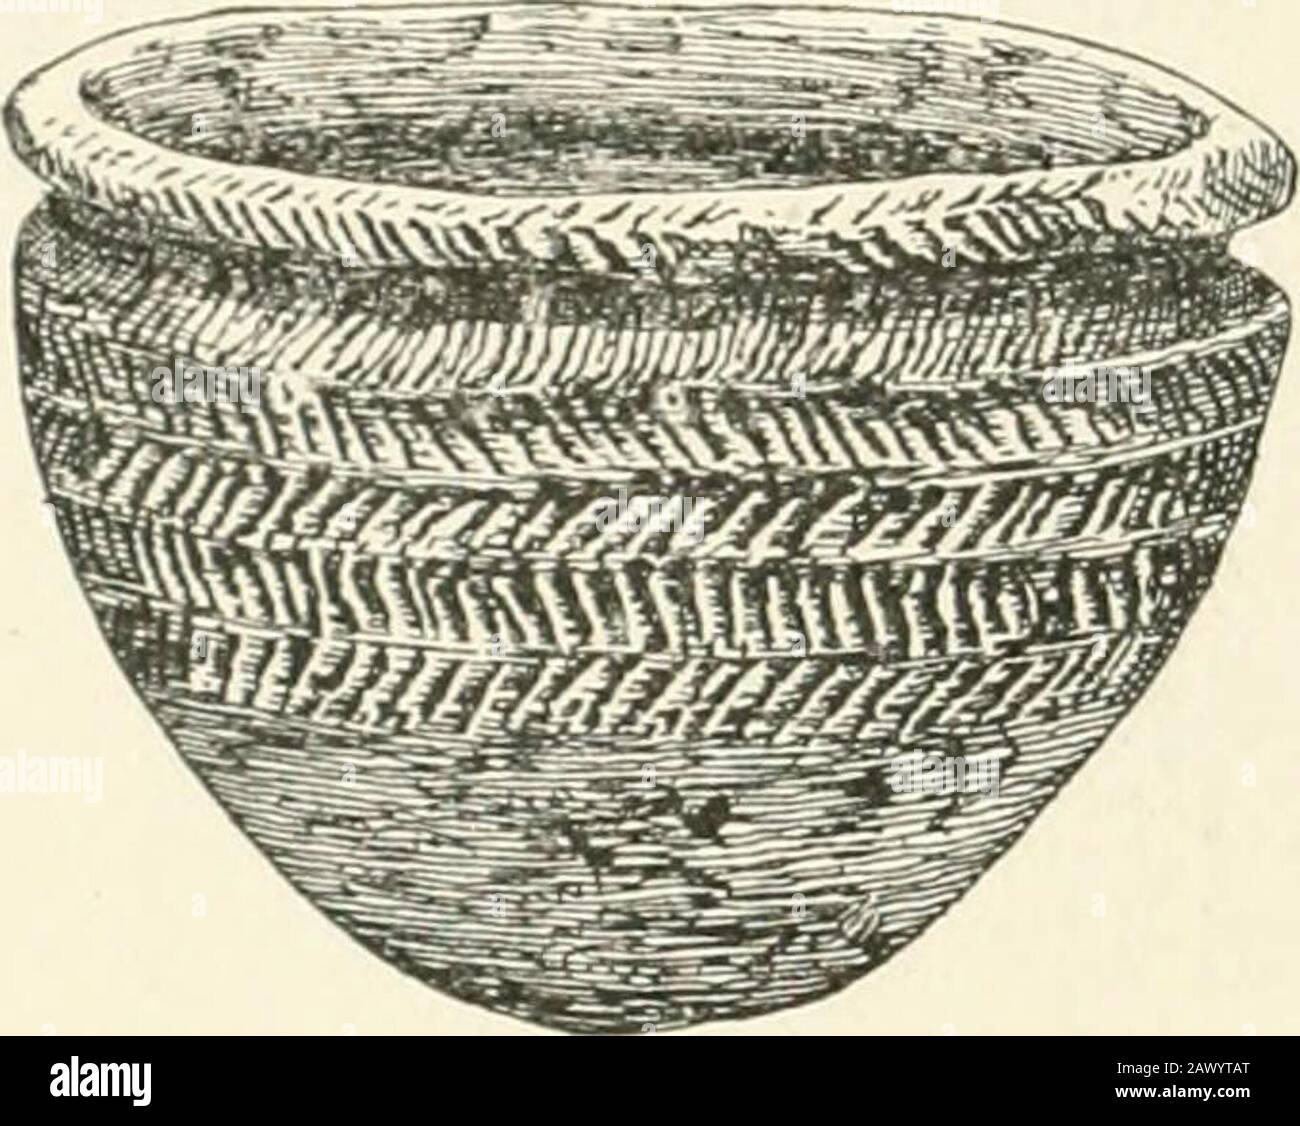 An introduction to the study of prehistoric art . FiG. 173.—Neolithic bowl. Orkney. ness and Sutherland similar pottery has been discovered inseveral chambered cairns.^ It will be observed that thesevessels, like that from Norton Bavant, are round bottomed, 1 J. Anderson, Scotlan.l in Pagan Times—Stone Age, Lecture V,Figs. 261-3, 274-9. Figs. 171-3 are taken from this work. 142 PREHISTORIC ART. Fig. 174.—Neolithic pottery.Thames. a feature which has been regarded as a Neolithic character-istic. Similar round-bottomed ware has been recoveredfrom the Thames (Fig. 174) at Mortlake and Wallingford Stock Photo